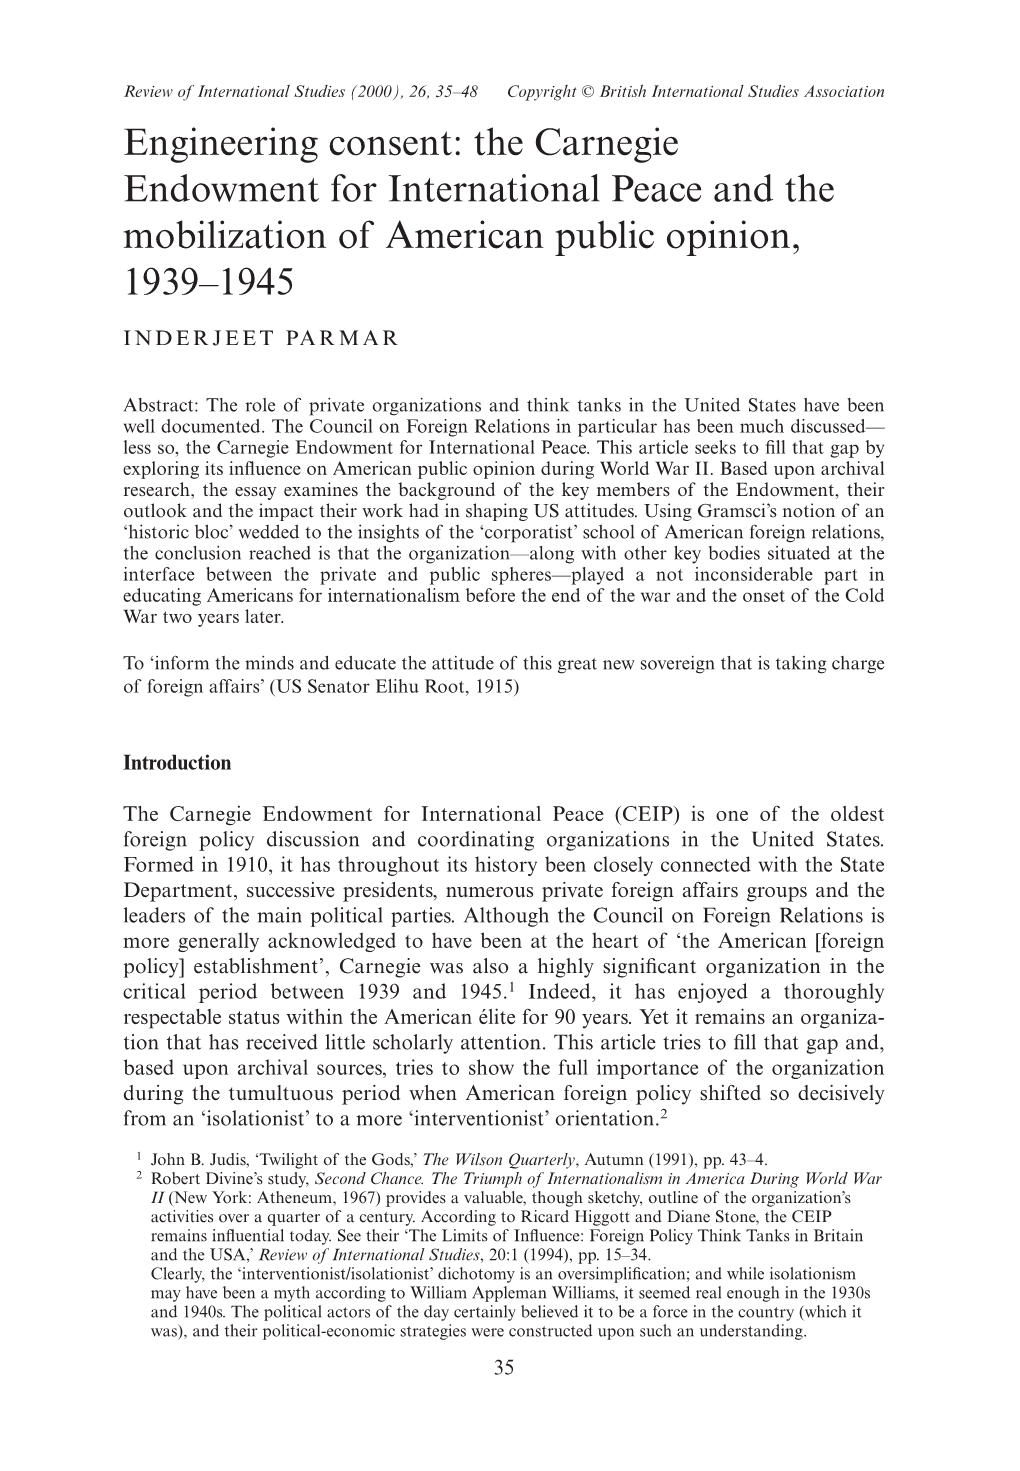 Engineering Consent: the Carnegie Endowment for International Peace and the Mobilization of American Public Opinion, 1939–1945